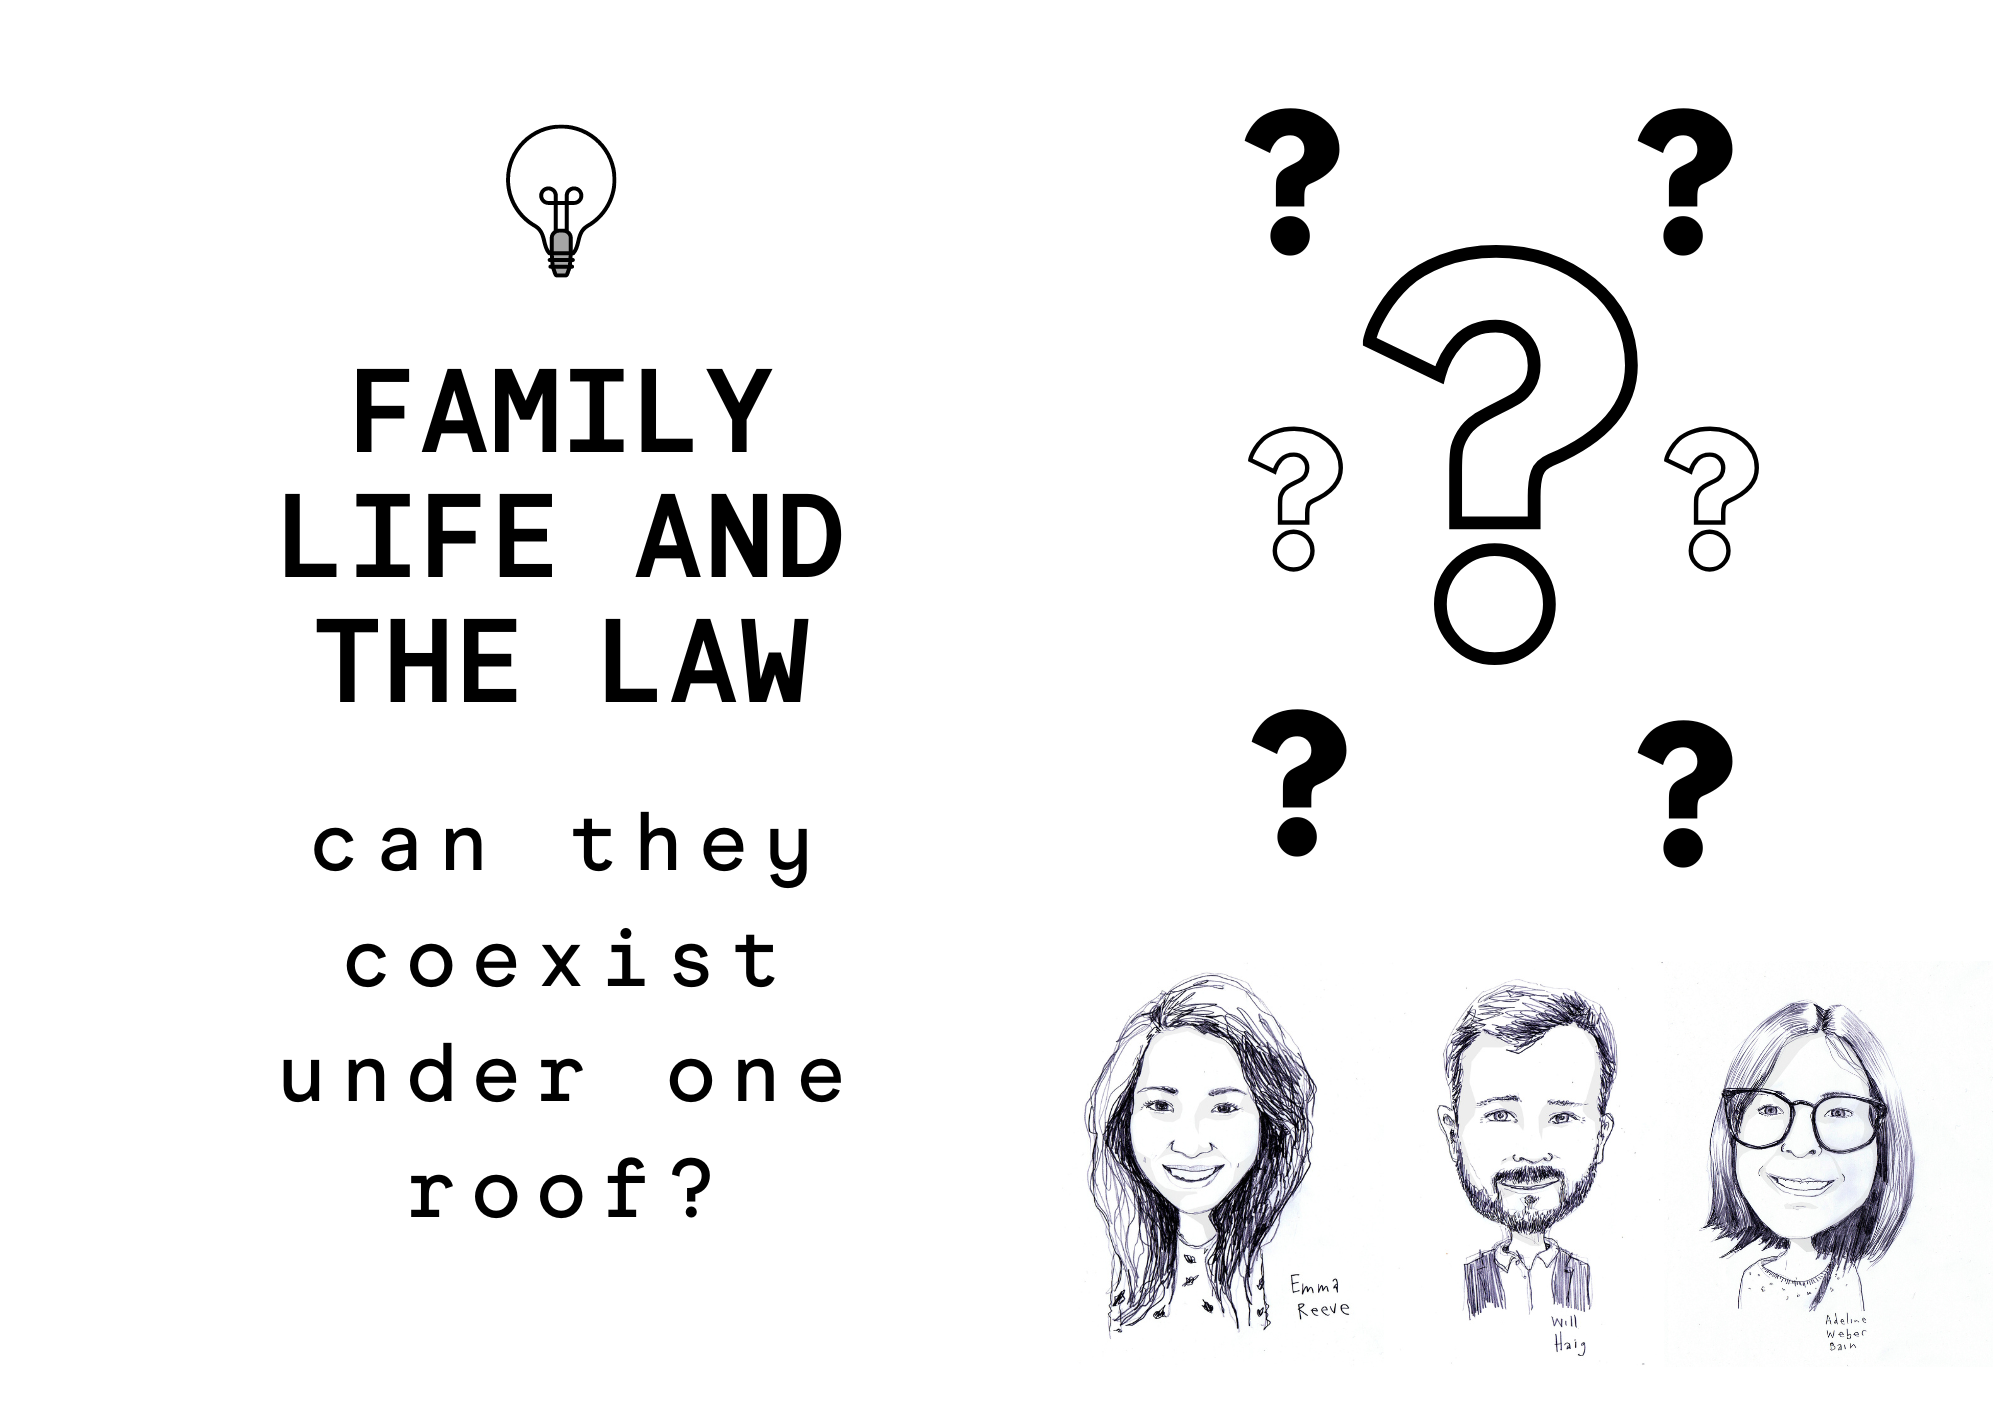 Family life and the law: can they coexist under one roof?